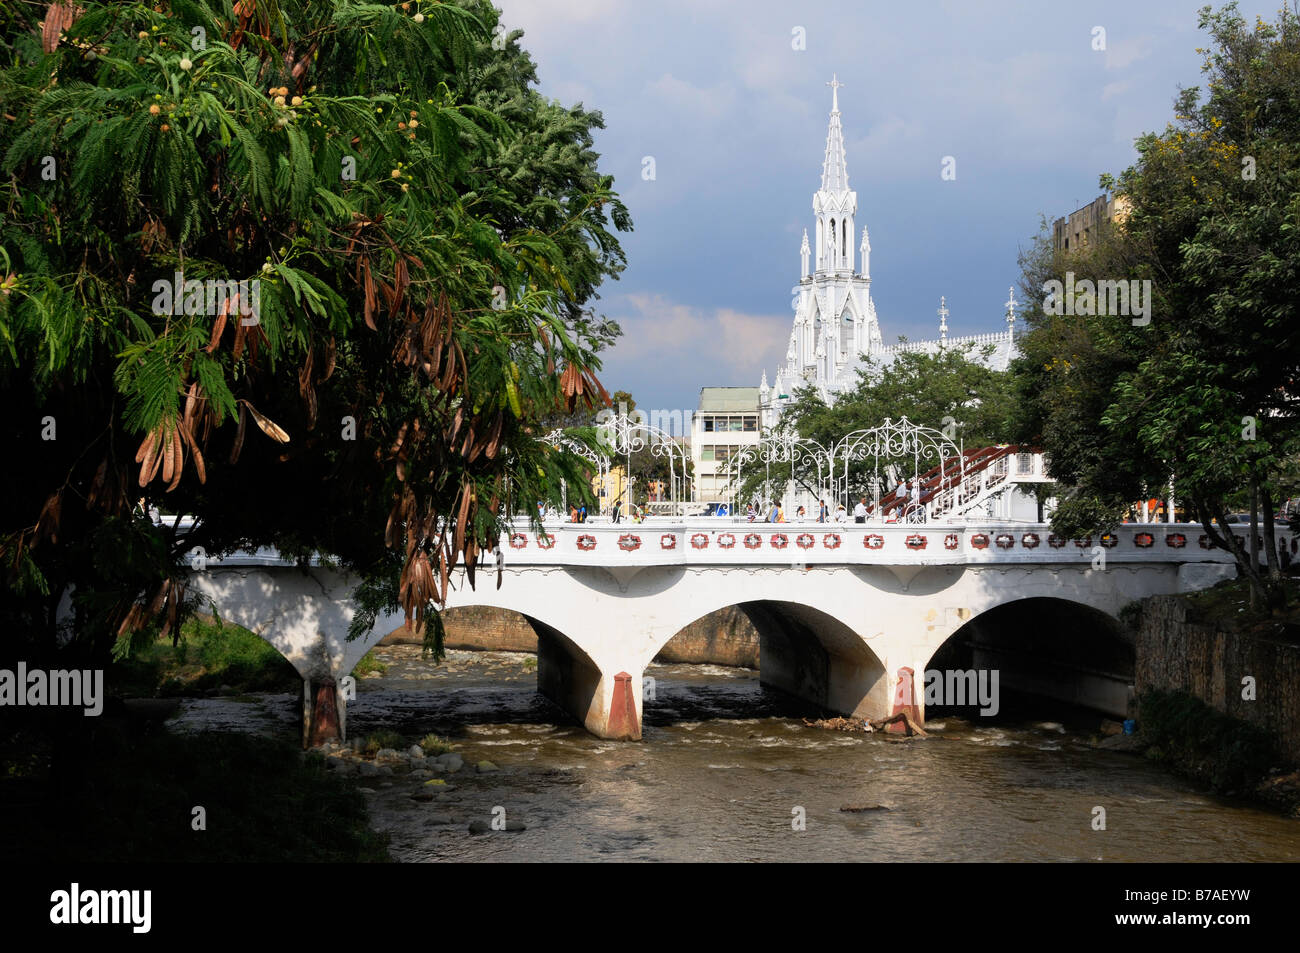 A view of the city center in Cali, Columbia. Stock Photo